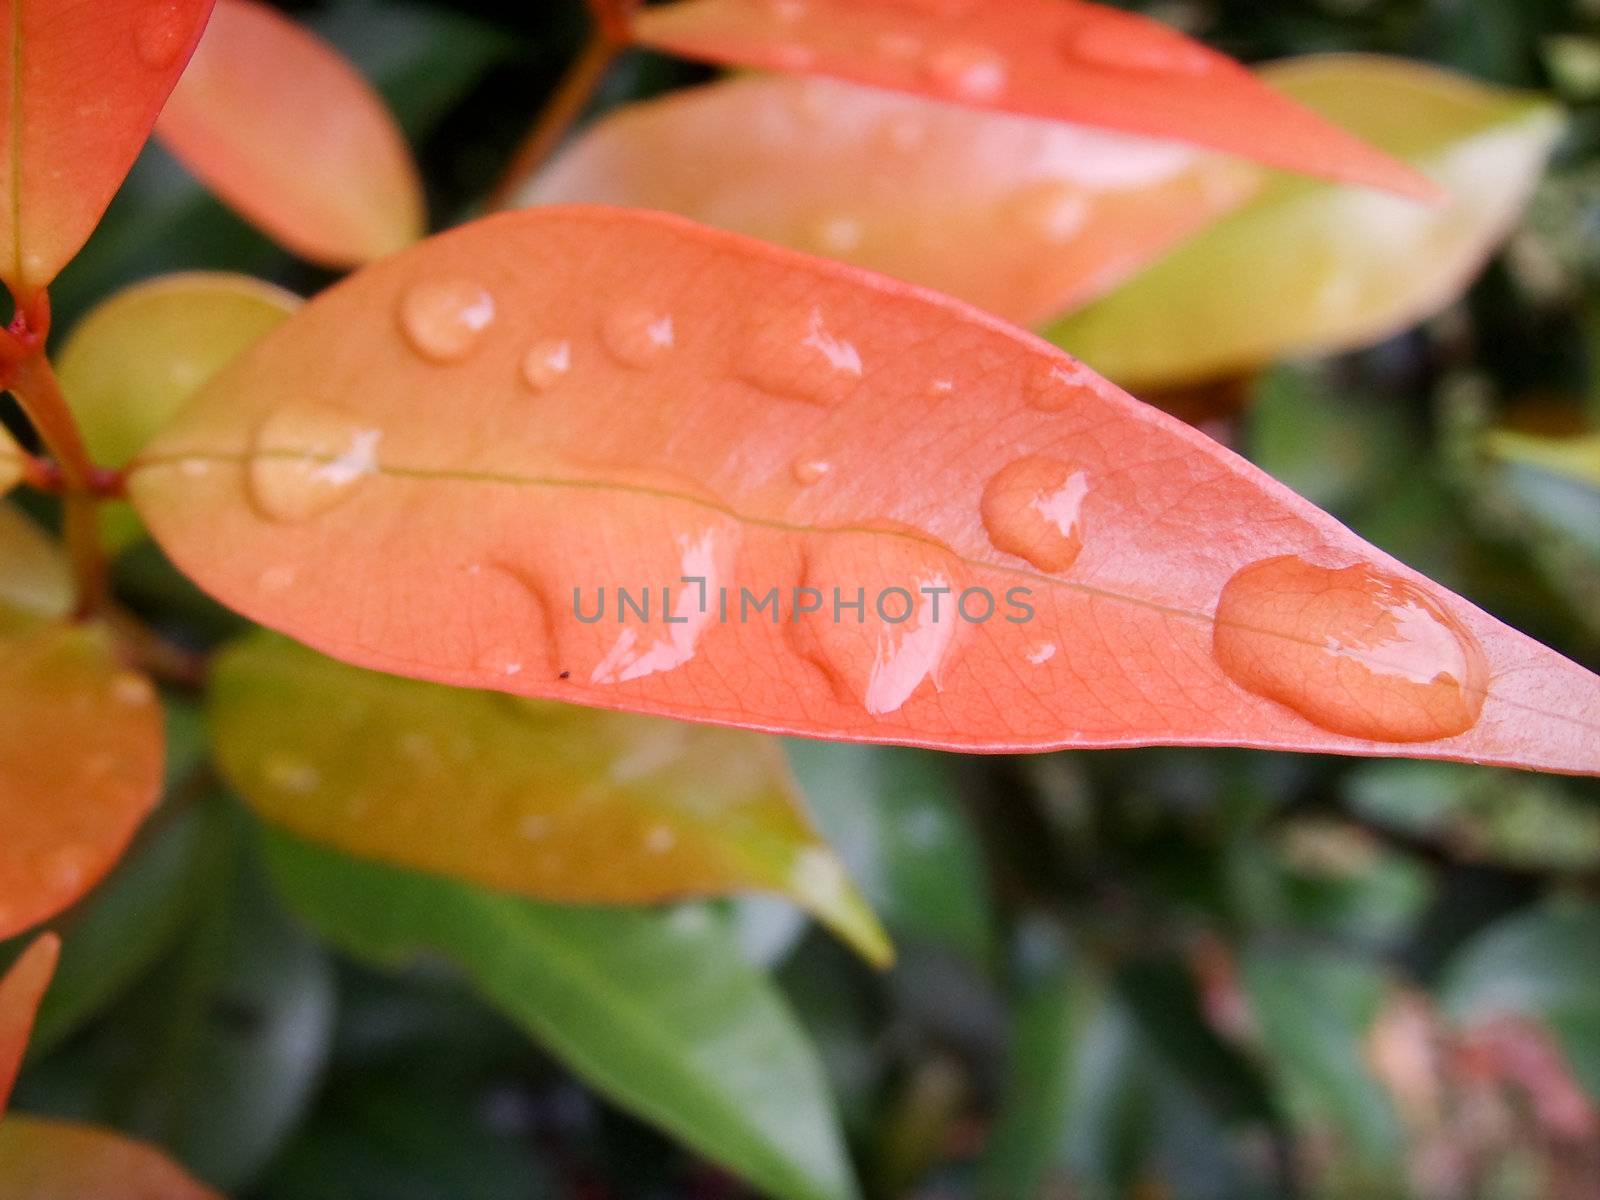 Leaf with droplets by alvingb